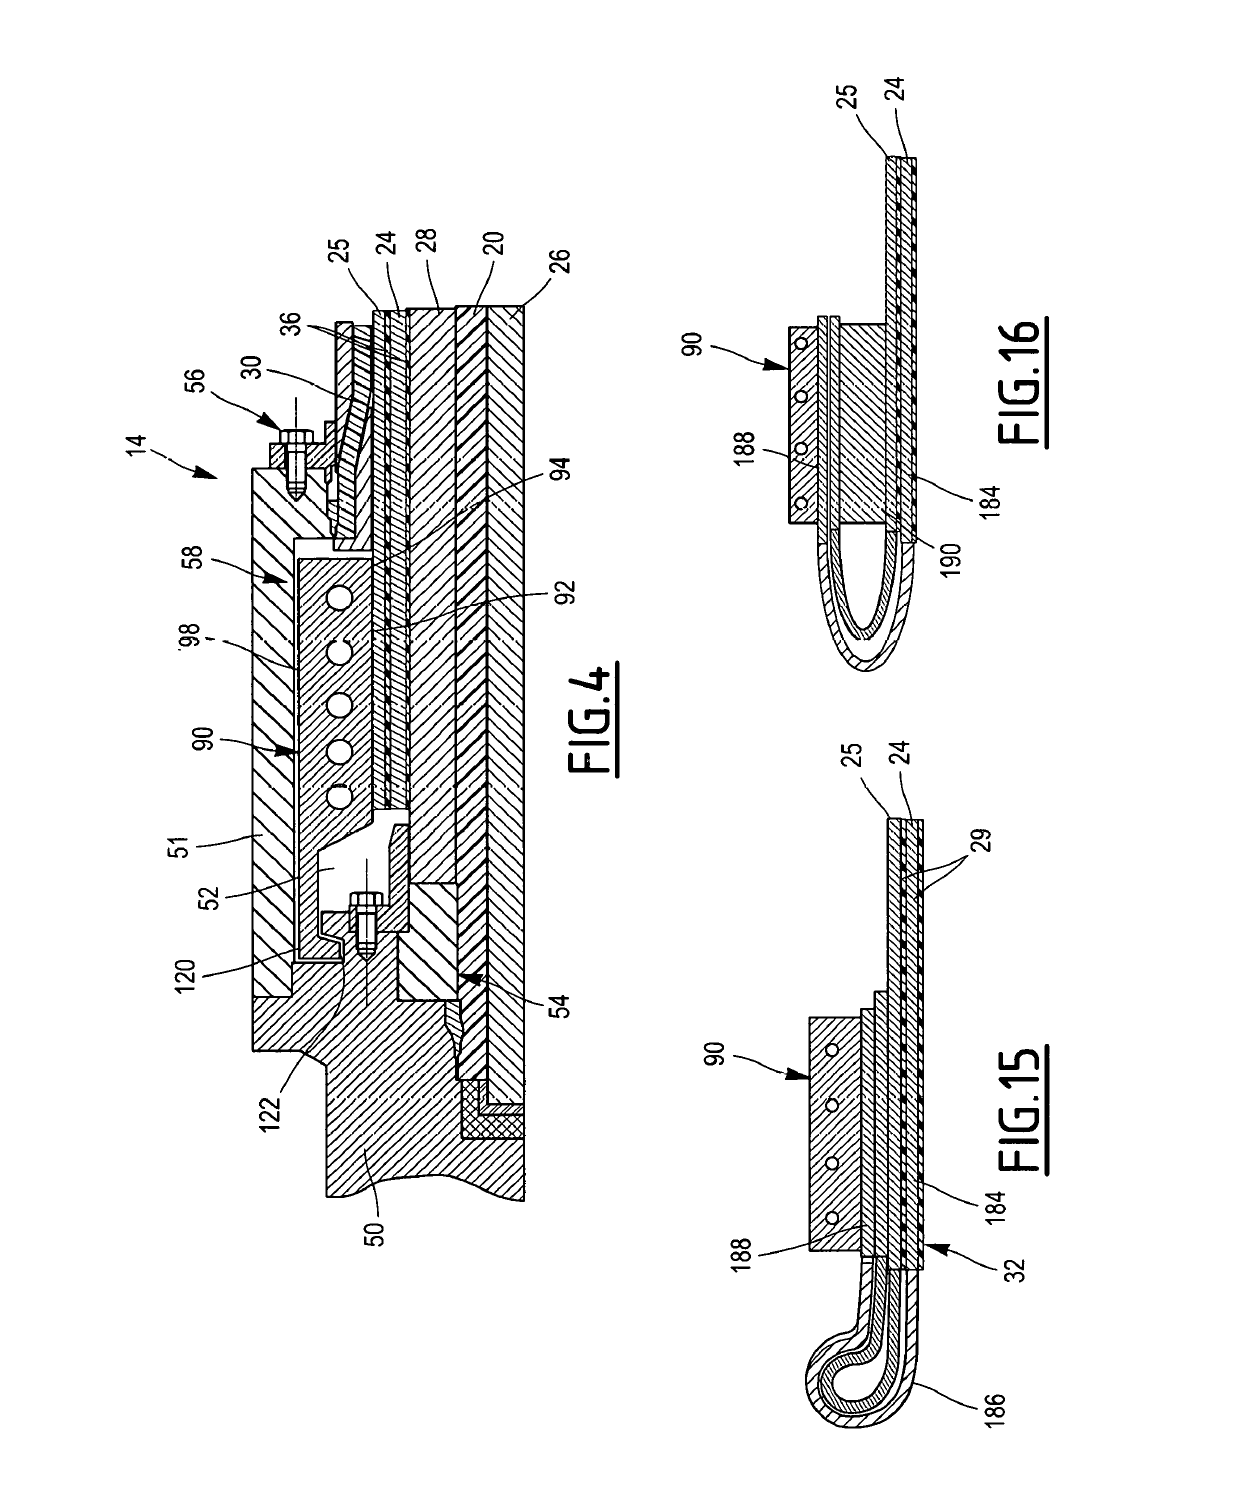 Connection end-piece of a flexible pipe for transporting fluid and associated method